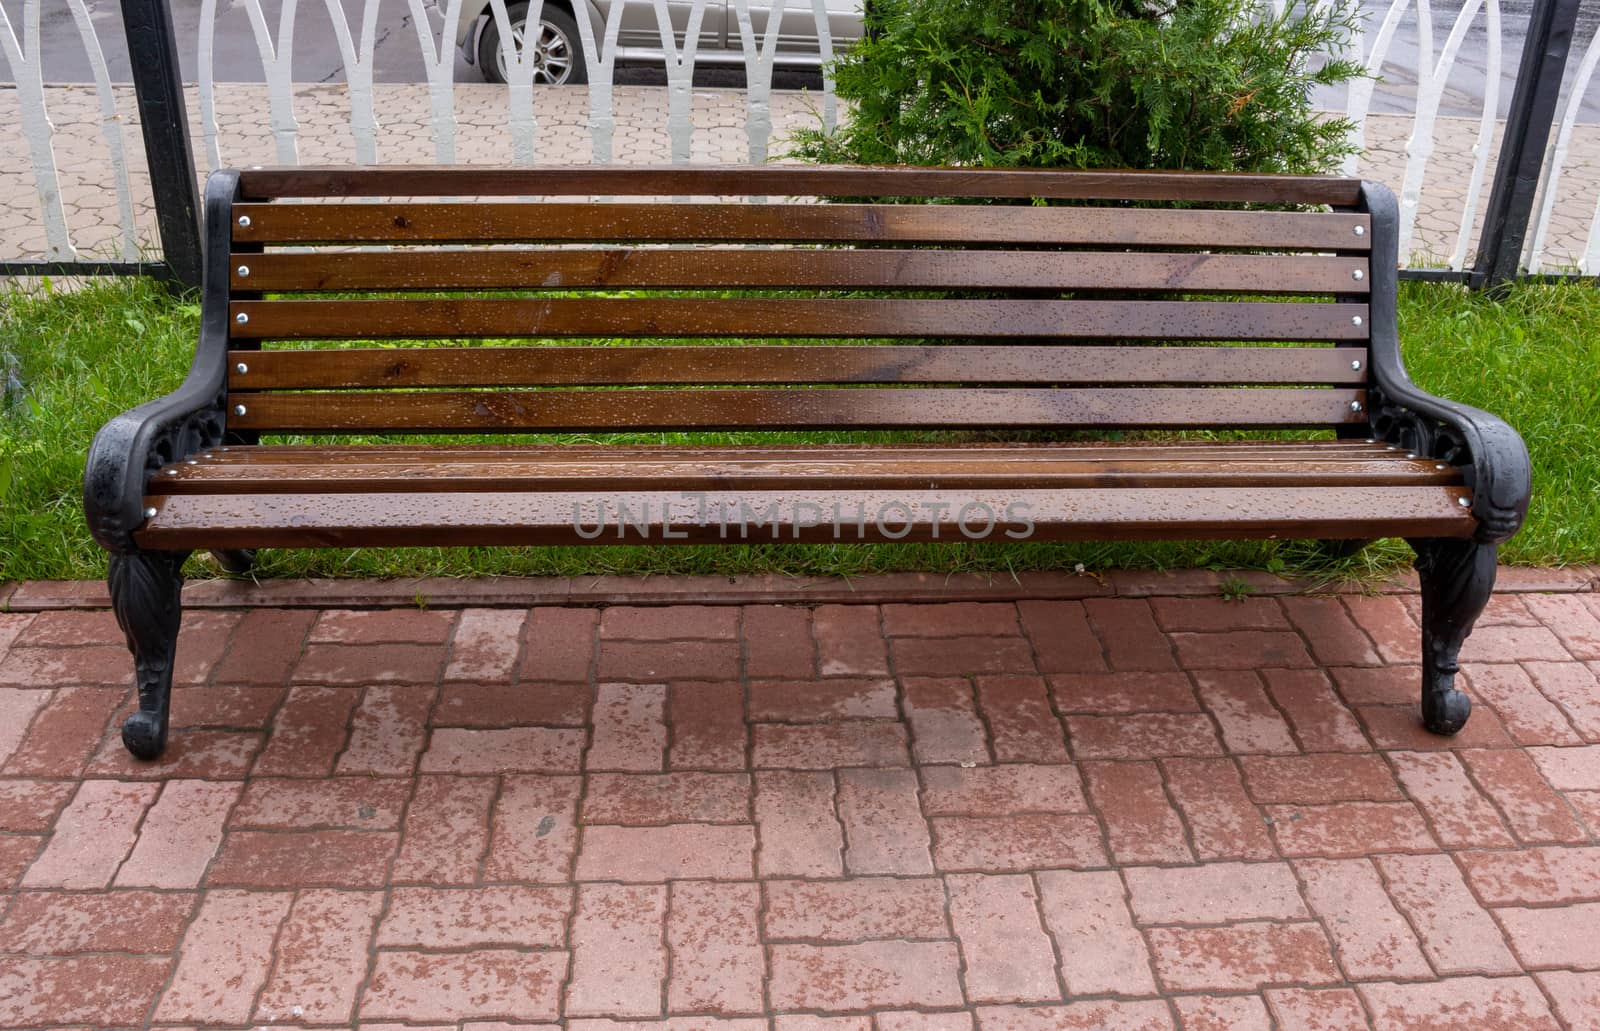 A rain-soaked brown bench in an autumn Park.